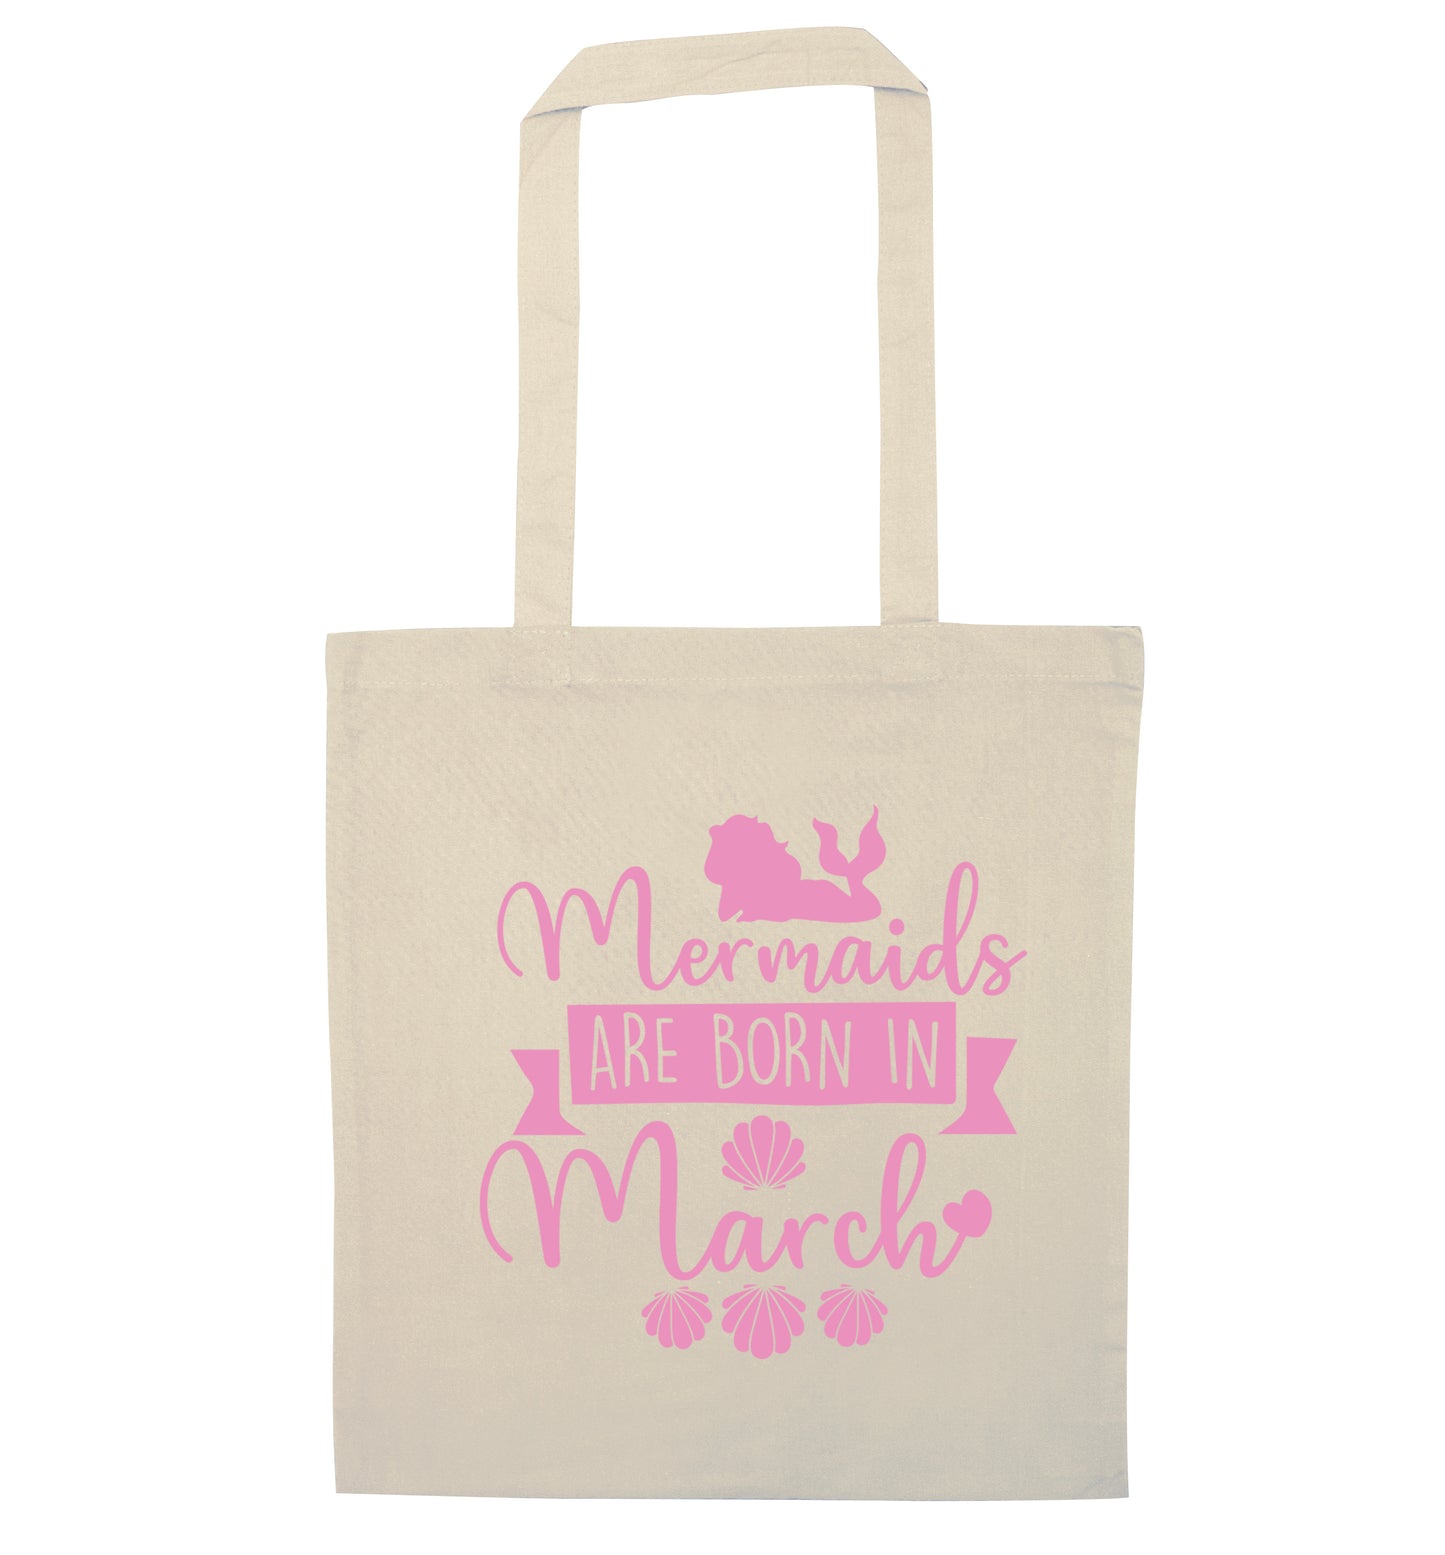 Mermaids are born in March natural tote bag